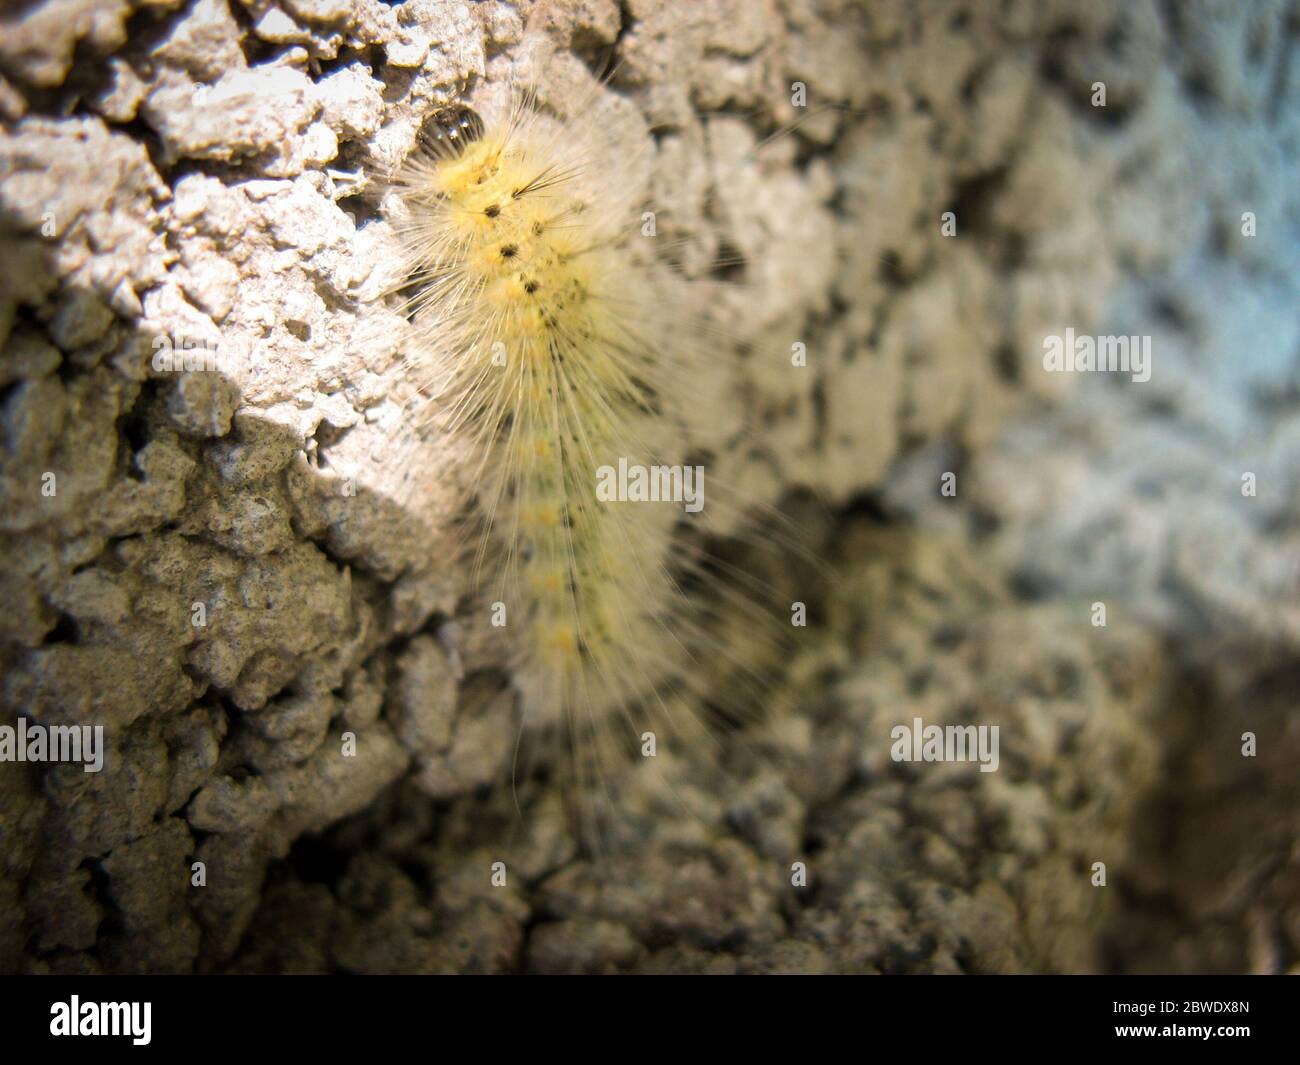 https://c8.alamy.com/comp/2BWDX8N/woolly-worm-on-stonecloseup-of-a-cute-fluffy-worm-in-summer-in-iran-2BWDX8N.jpg